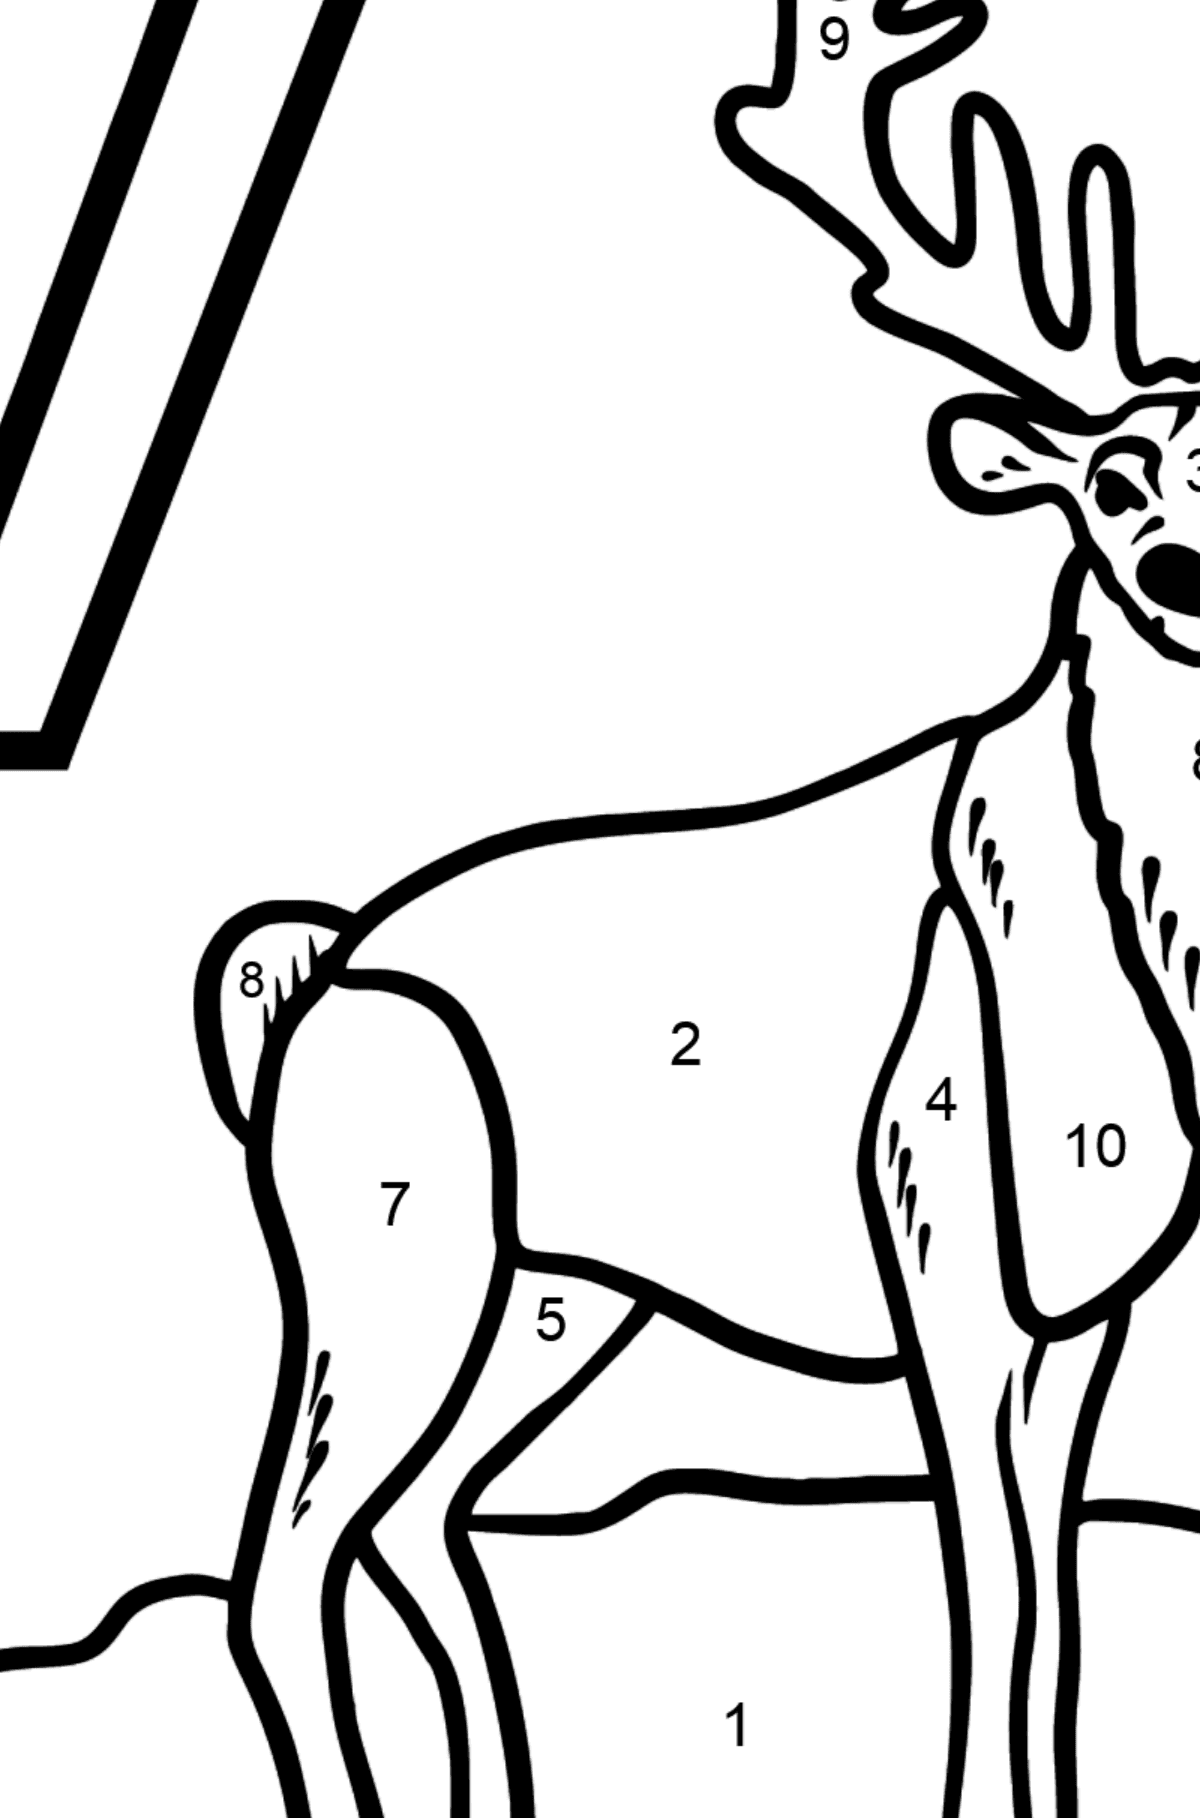 Portuguese Letter V coloring pages - VEADO - Coloring by Numbers for Kids